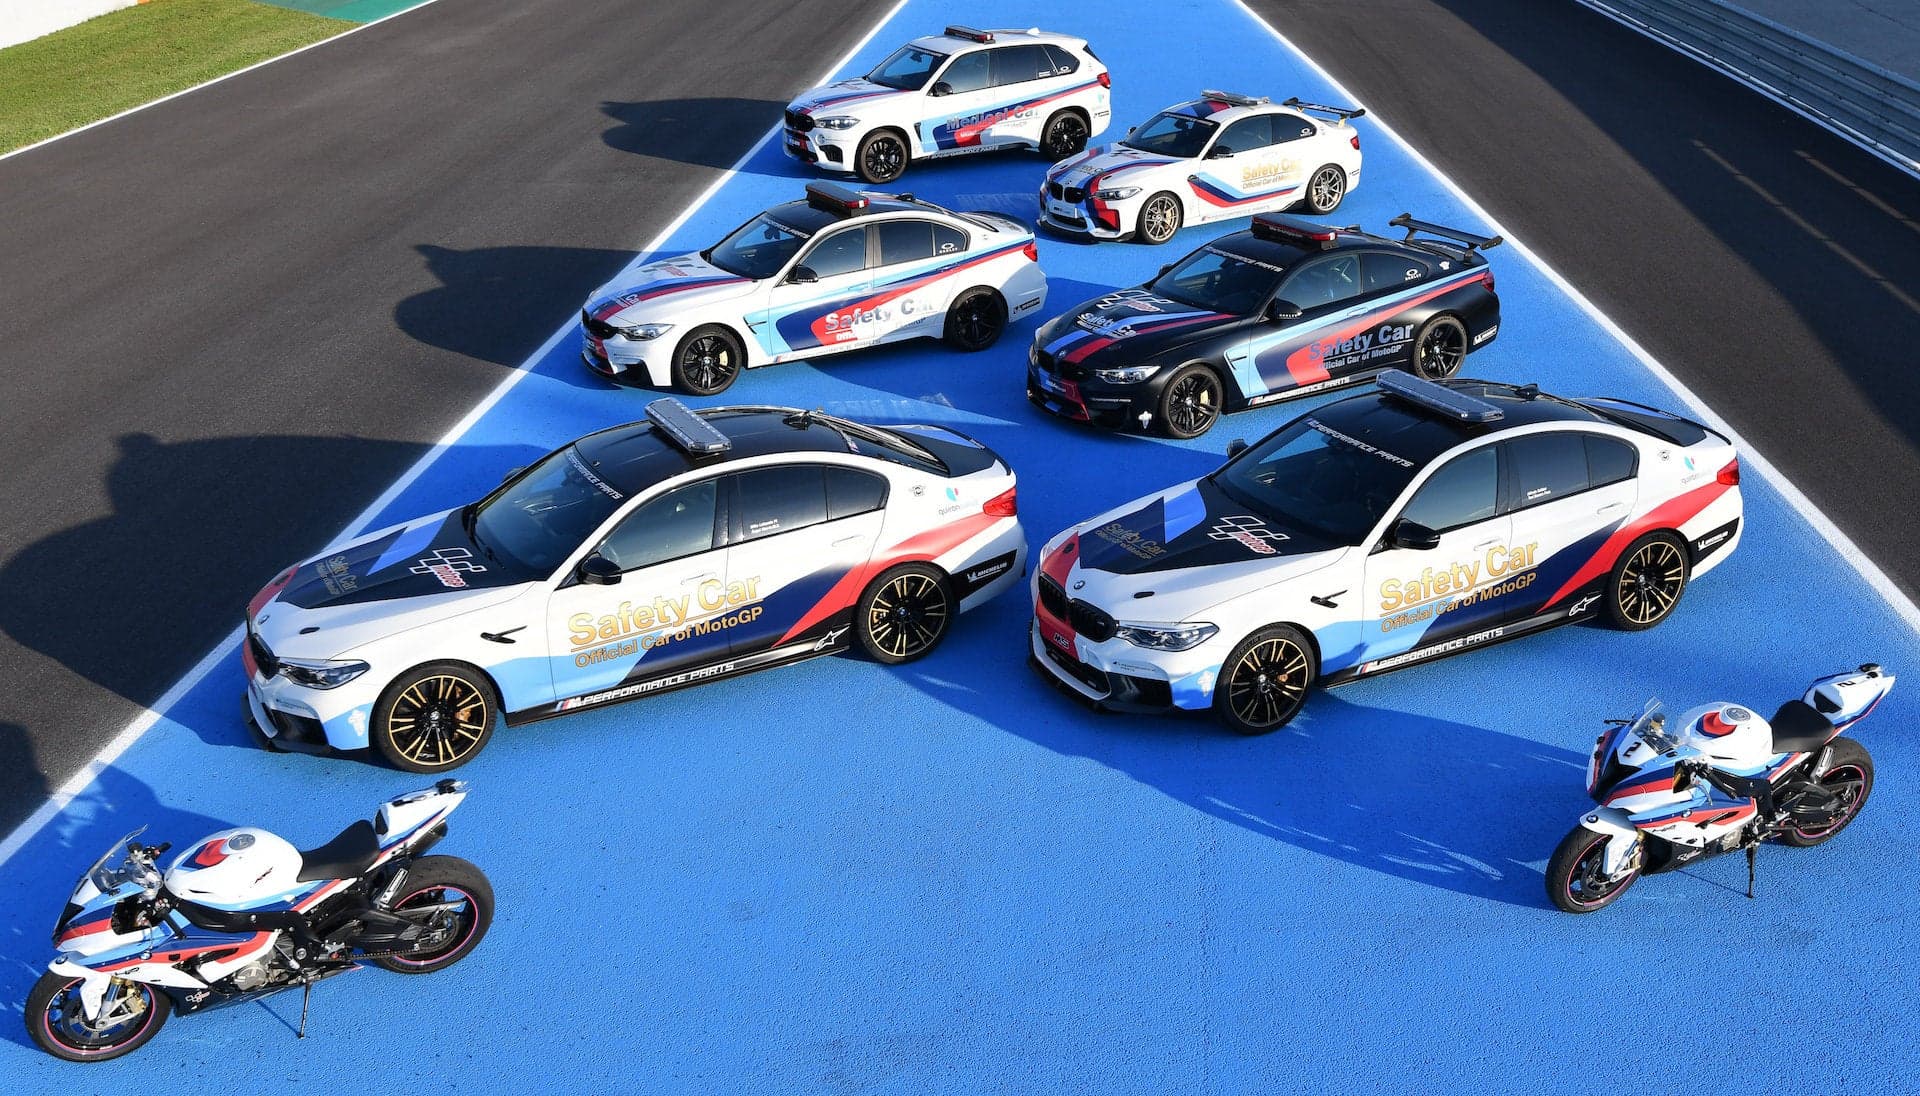 BMW M Celebrates Its 20th Anniversary Being MotoGP’s Official Car